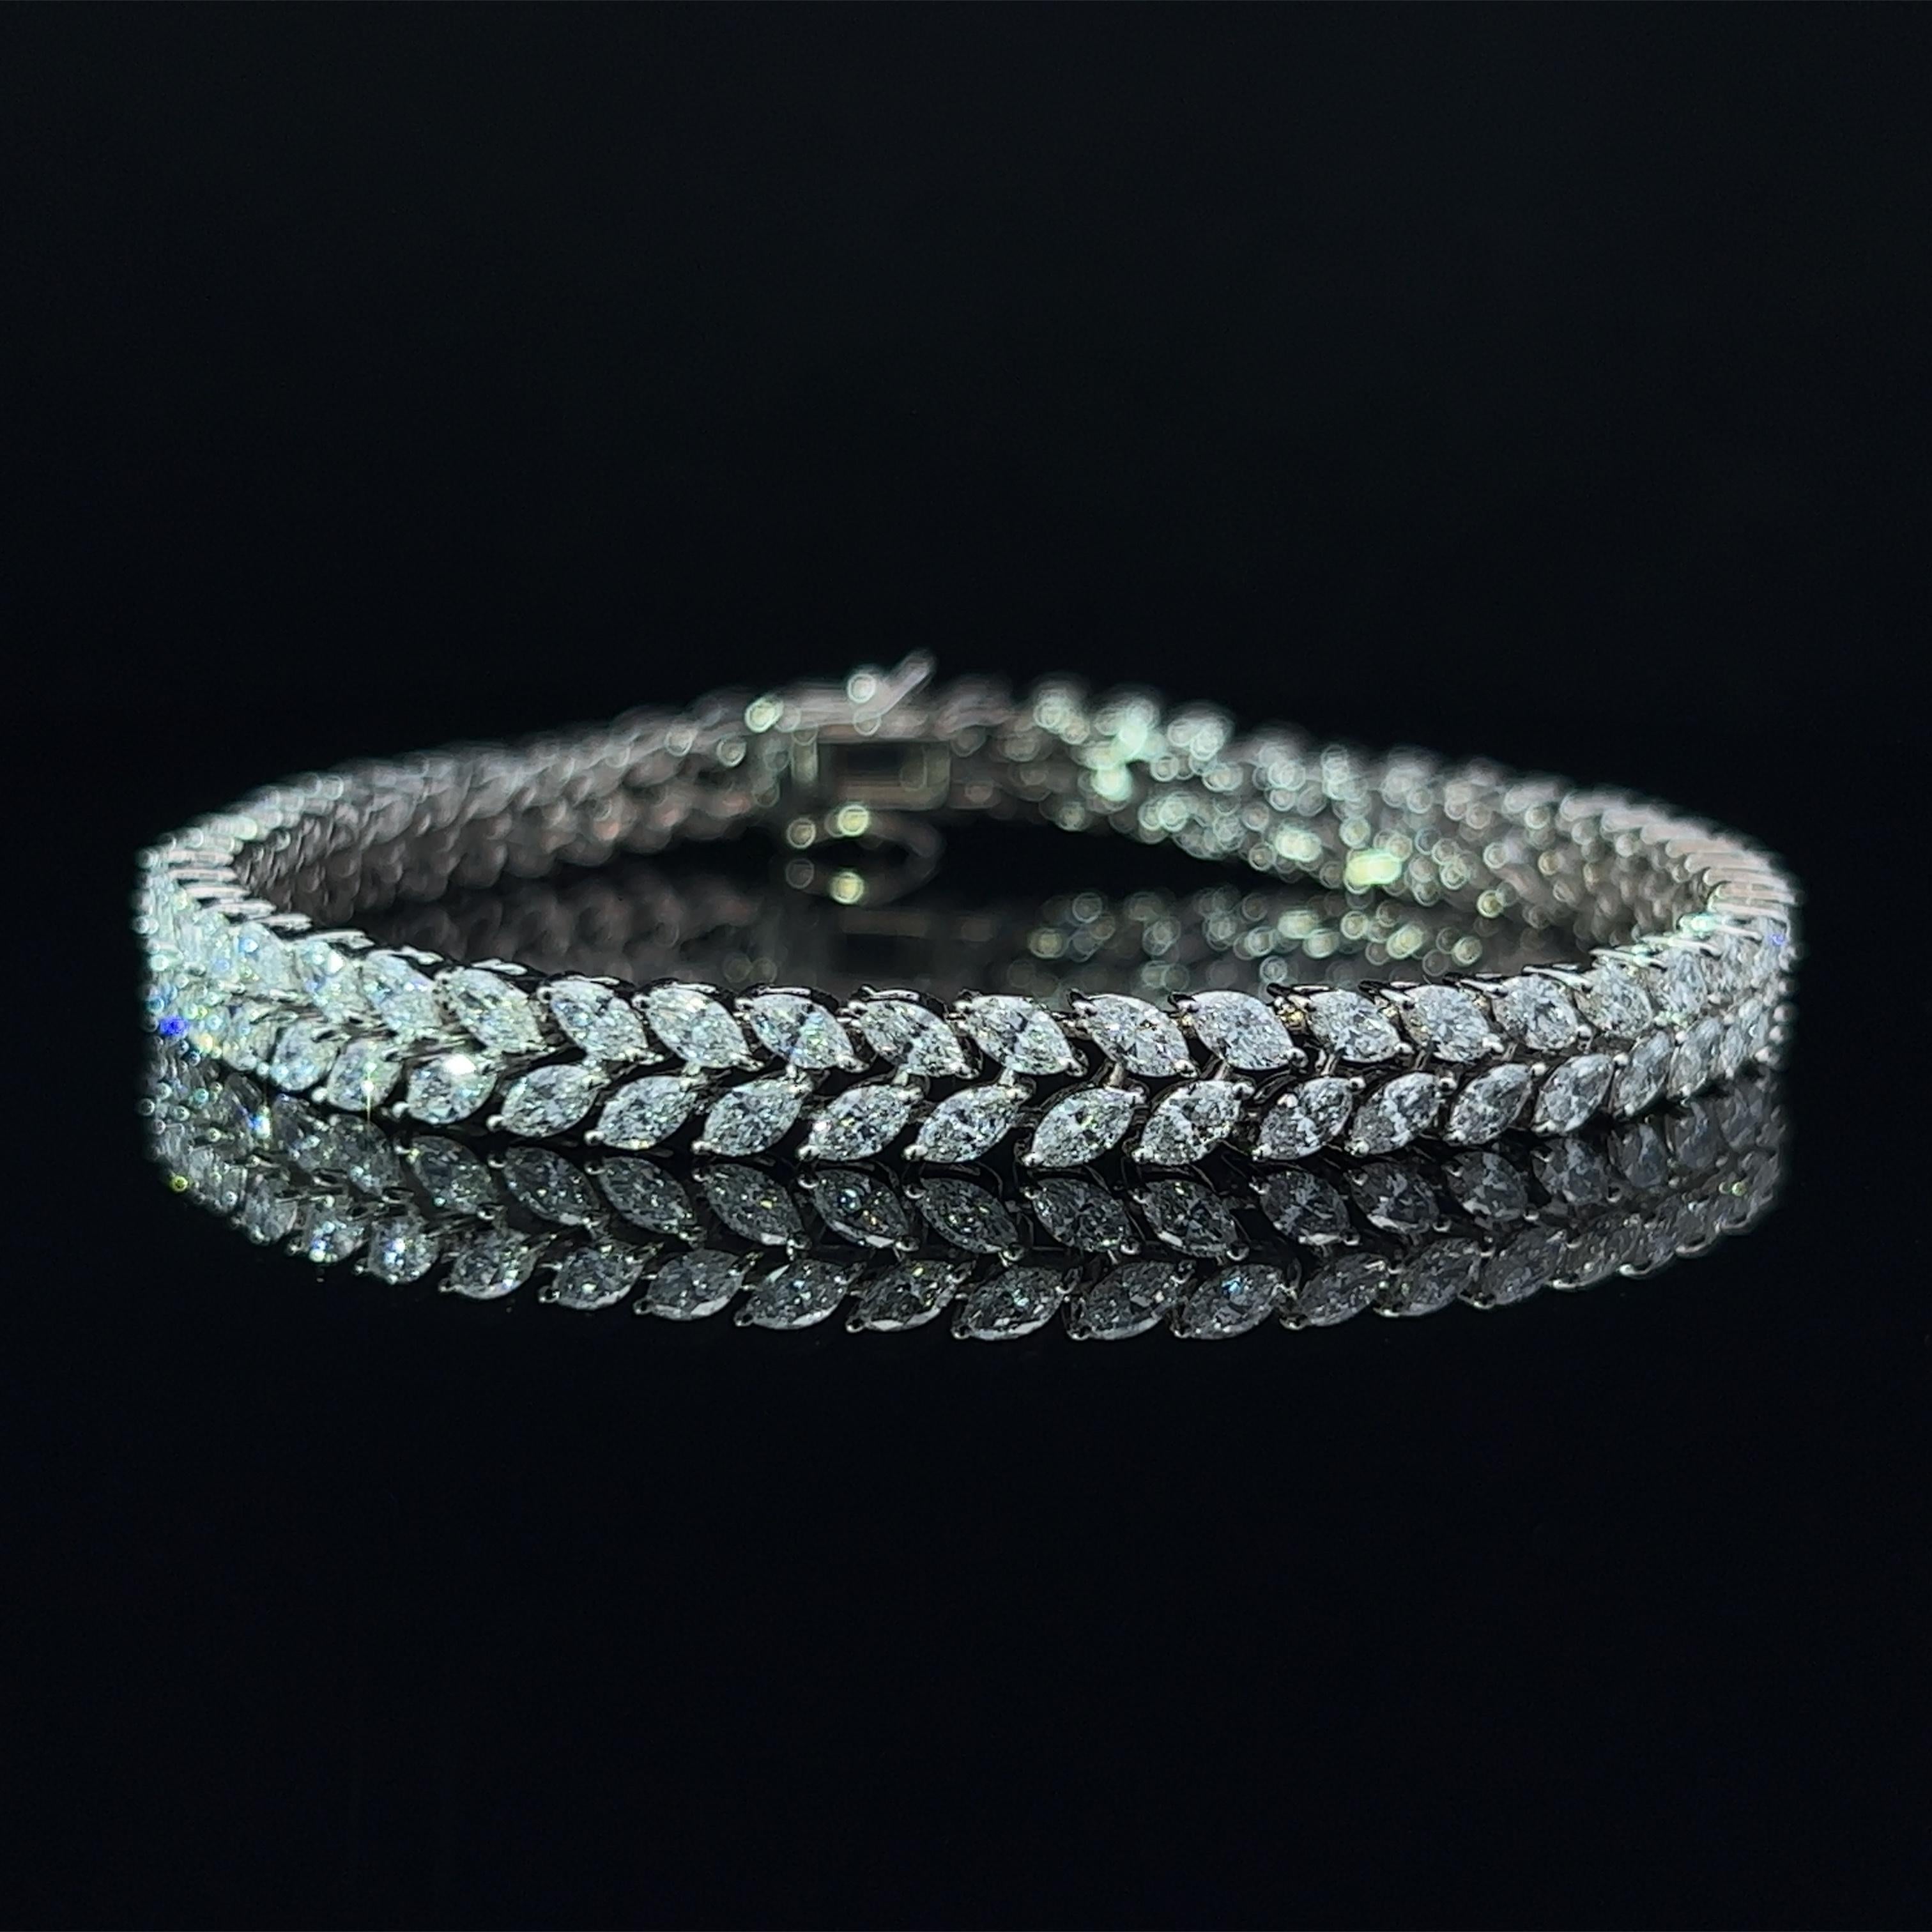 Diamond Shape: Marquise 
Total Diamond Weight: 7.14ct
Individual Diamond Weight: .10ct
Color/Clarity: GH VVS  
Metal: 18K White Gold  
Metal Weight: 15.47g 

Key Features:

Marquise-Cut Diamonds: The centerpiece of this bracelet features a dazzling